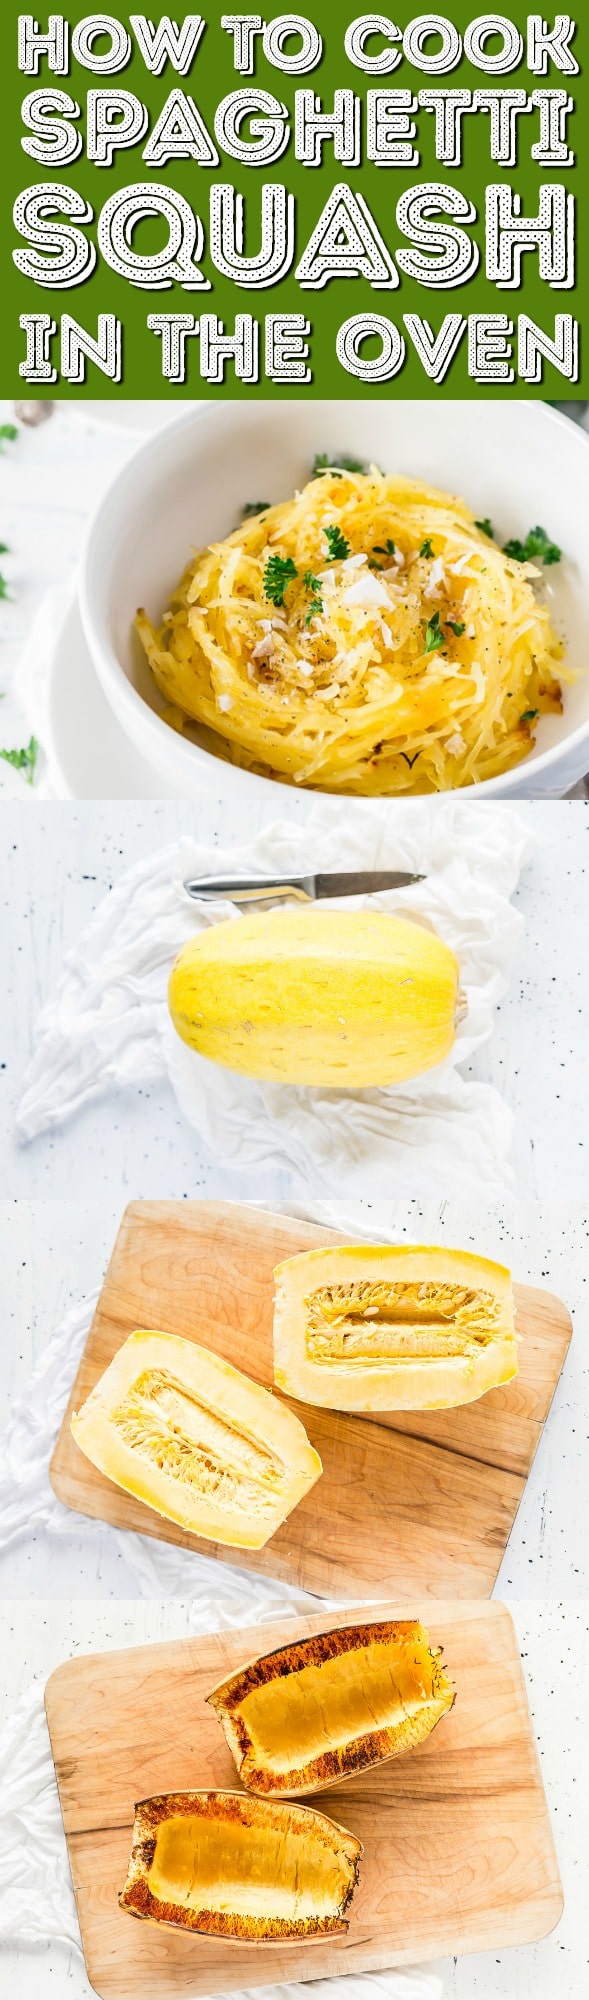 Use this simple step-by-step guide for How to Cook Spaghetti Squash in the oven for a delicious and healthy side dish, lunch, or dinner recipe! via @sugarandsoulco